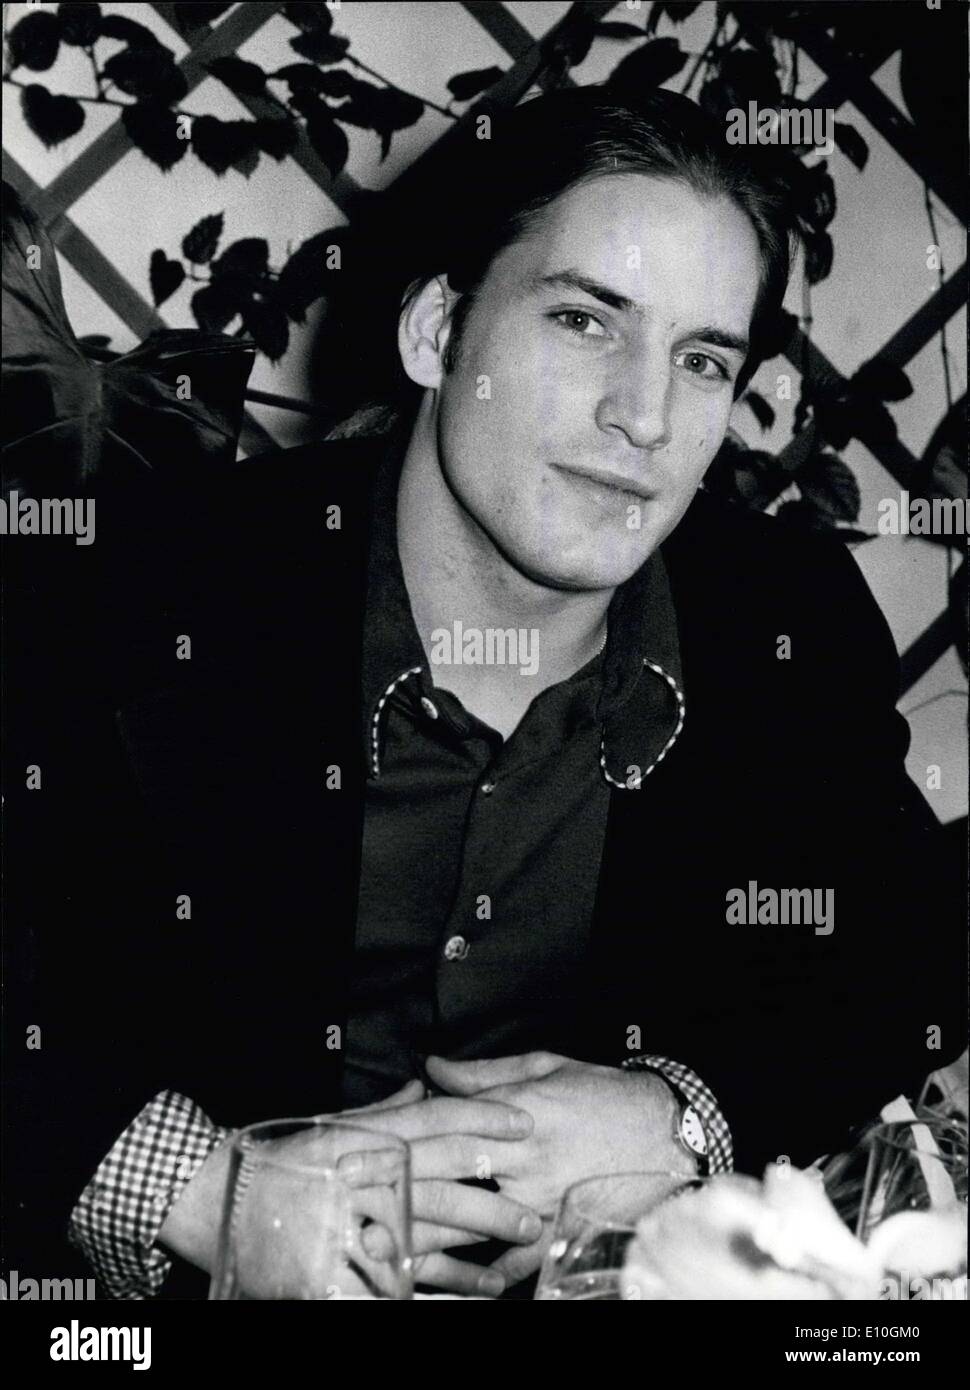 Jan. 18, 1973 - The Stars of Warhol's film ''Hollywood'' visit Munich: The Stars of the new film of Andy Warhol's Factory ''Hollywood'' came to Munich now for it's premiere in Germany. Picture Shows: Andy Warhol- Superstar Joe Dalesandro. Stock Photo